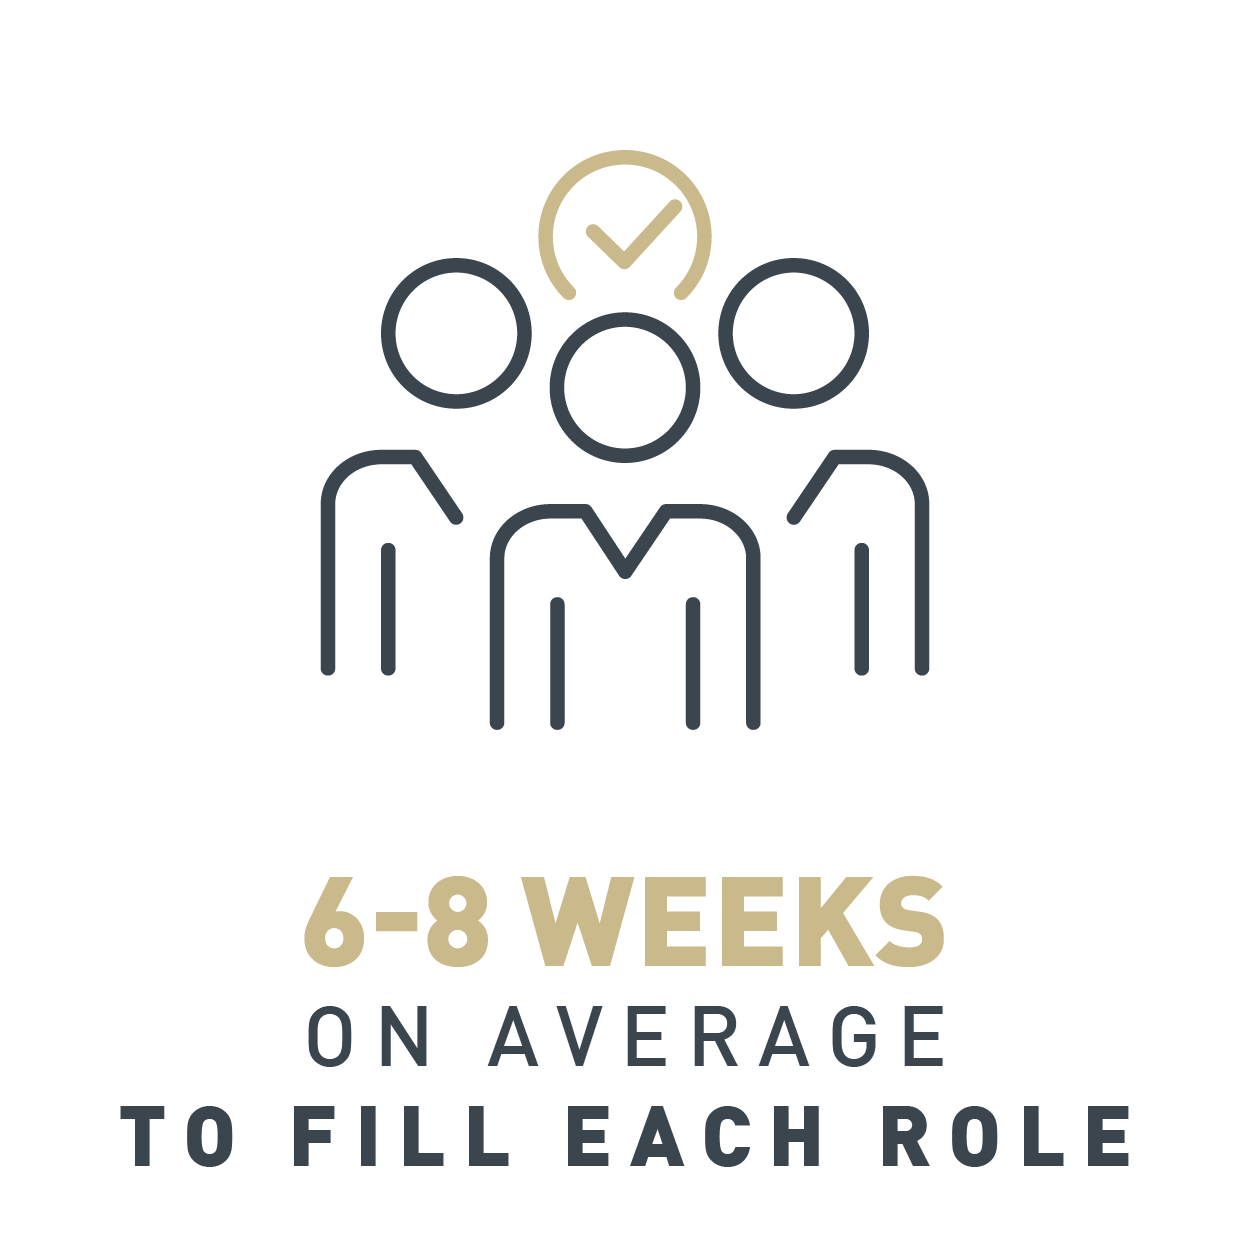 It took 6 to 8 weeks on average to fill each role